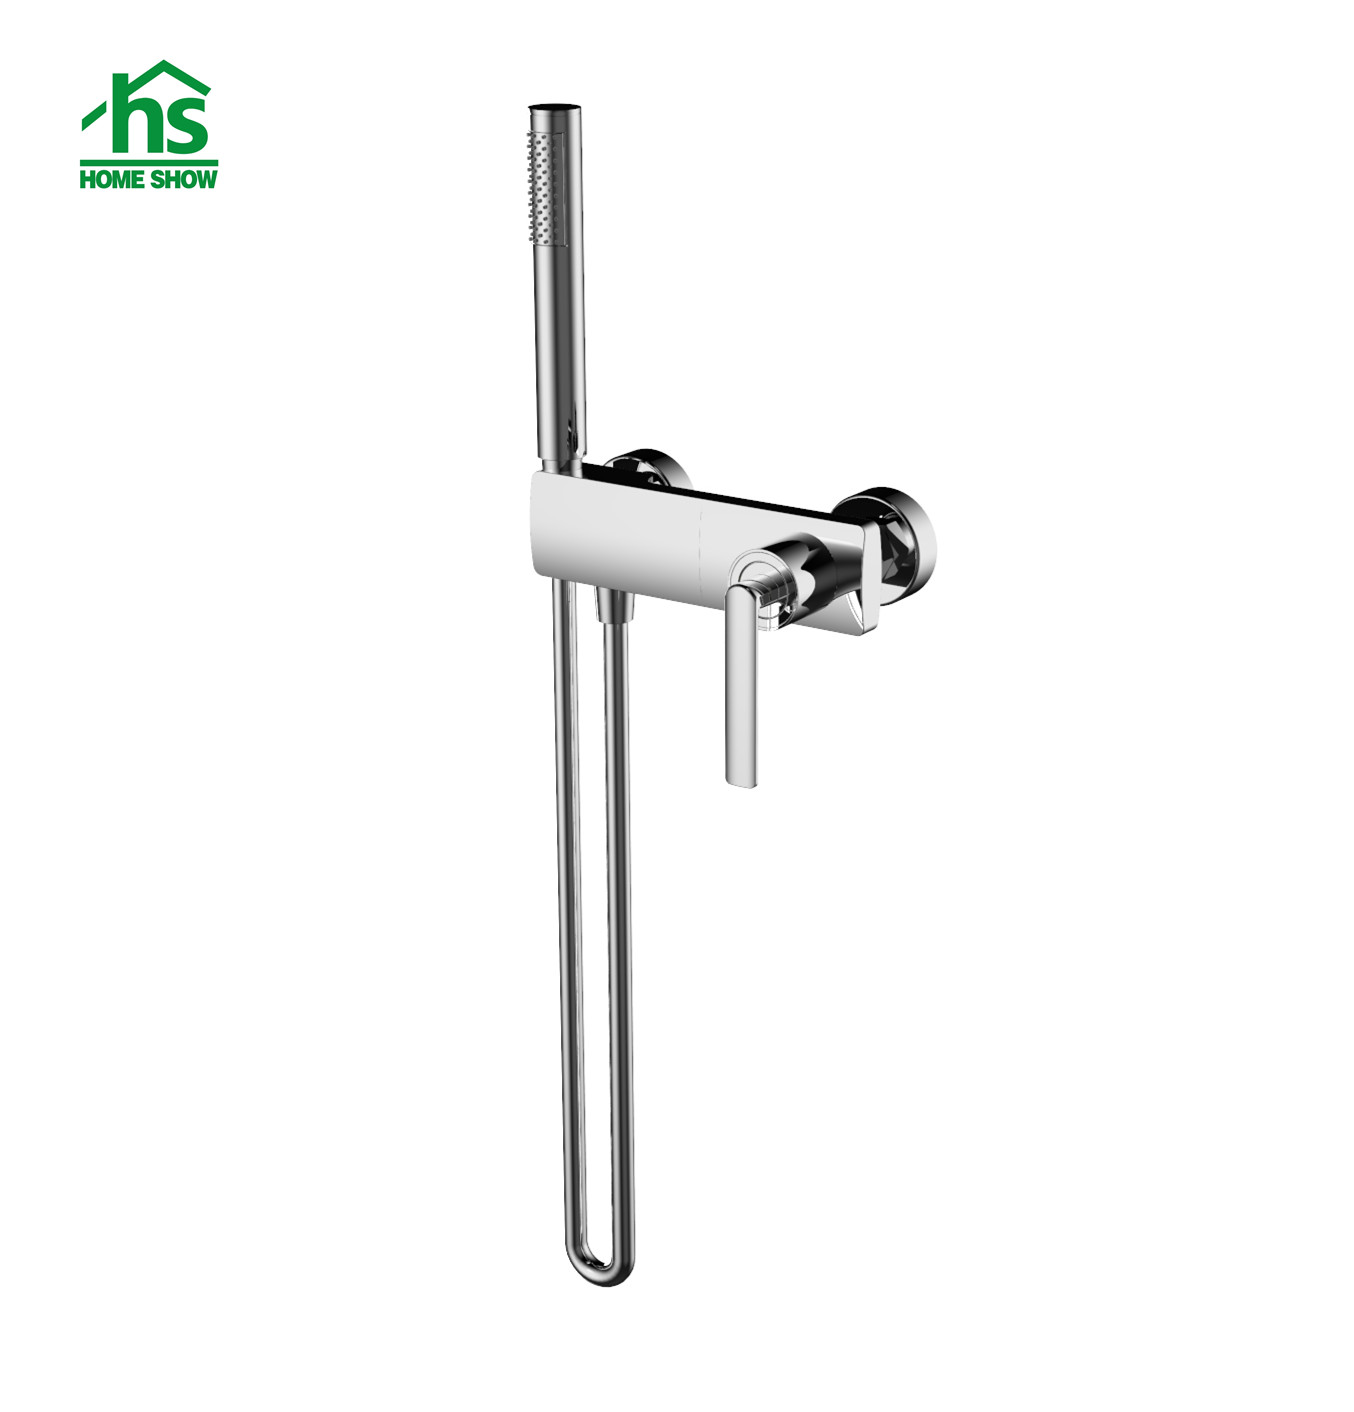 Factory Supply In Wall Brass Single Level Chrome Finish Basin Mixer Faucet M42 1003